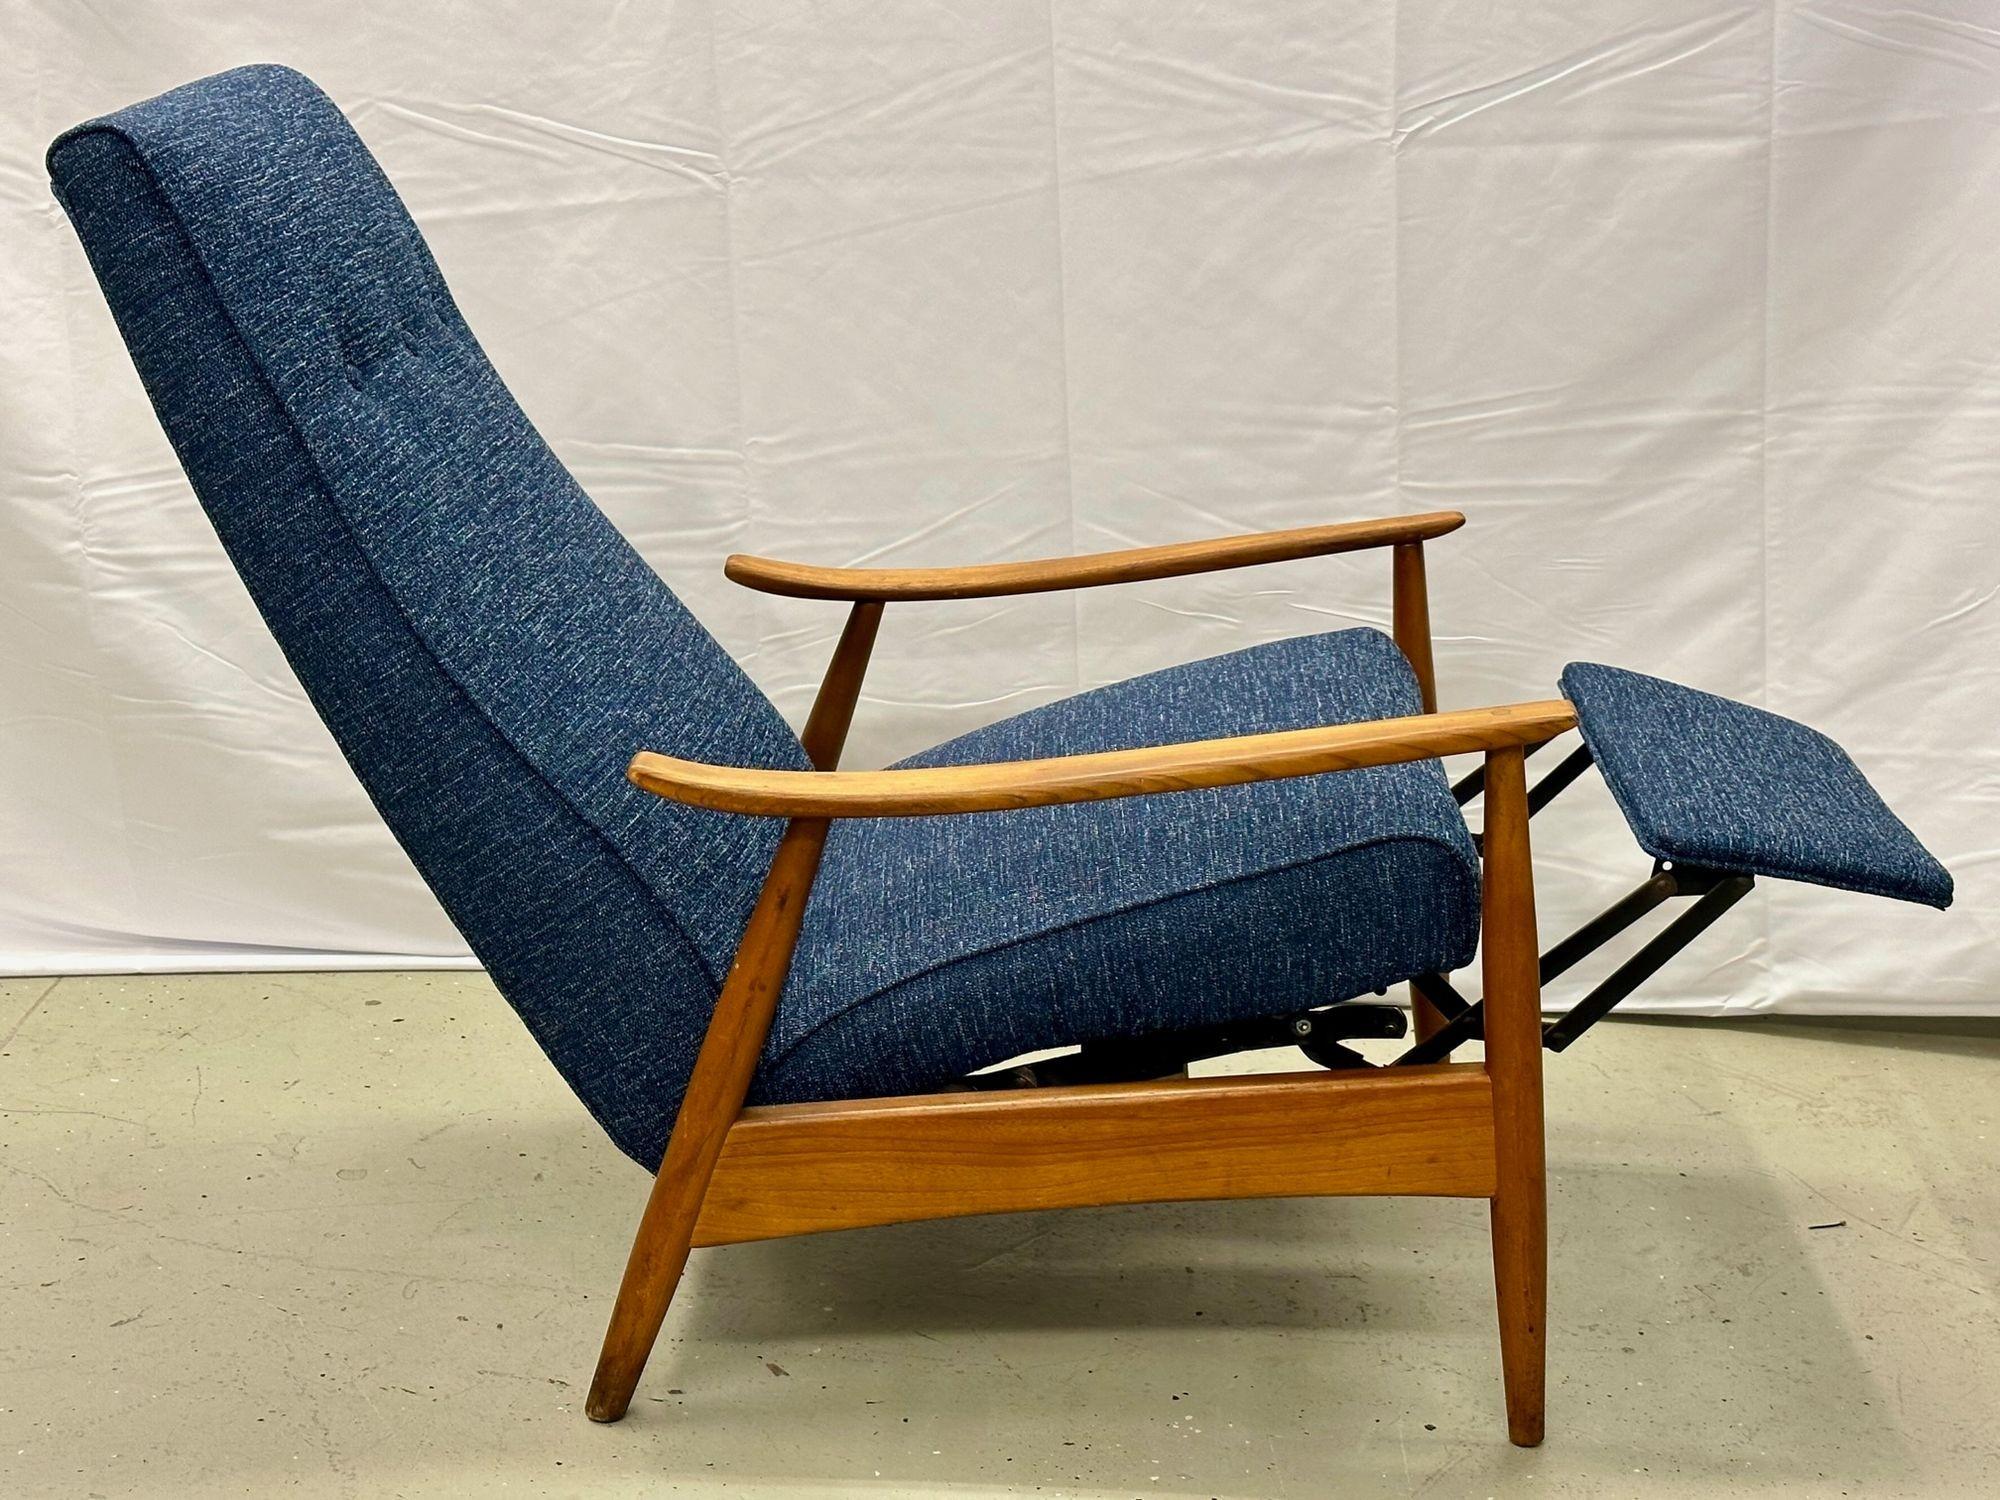 Mid-Century Modern Reclining Lounge Chair by Milo Baughman, Thayer Coggin, 1950s.
 
Reclining lounge chair designed by Milo Baughman for Thayer Coggin in the 1950s. This chair features a high slightly tilted backrest and floating footrest when